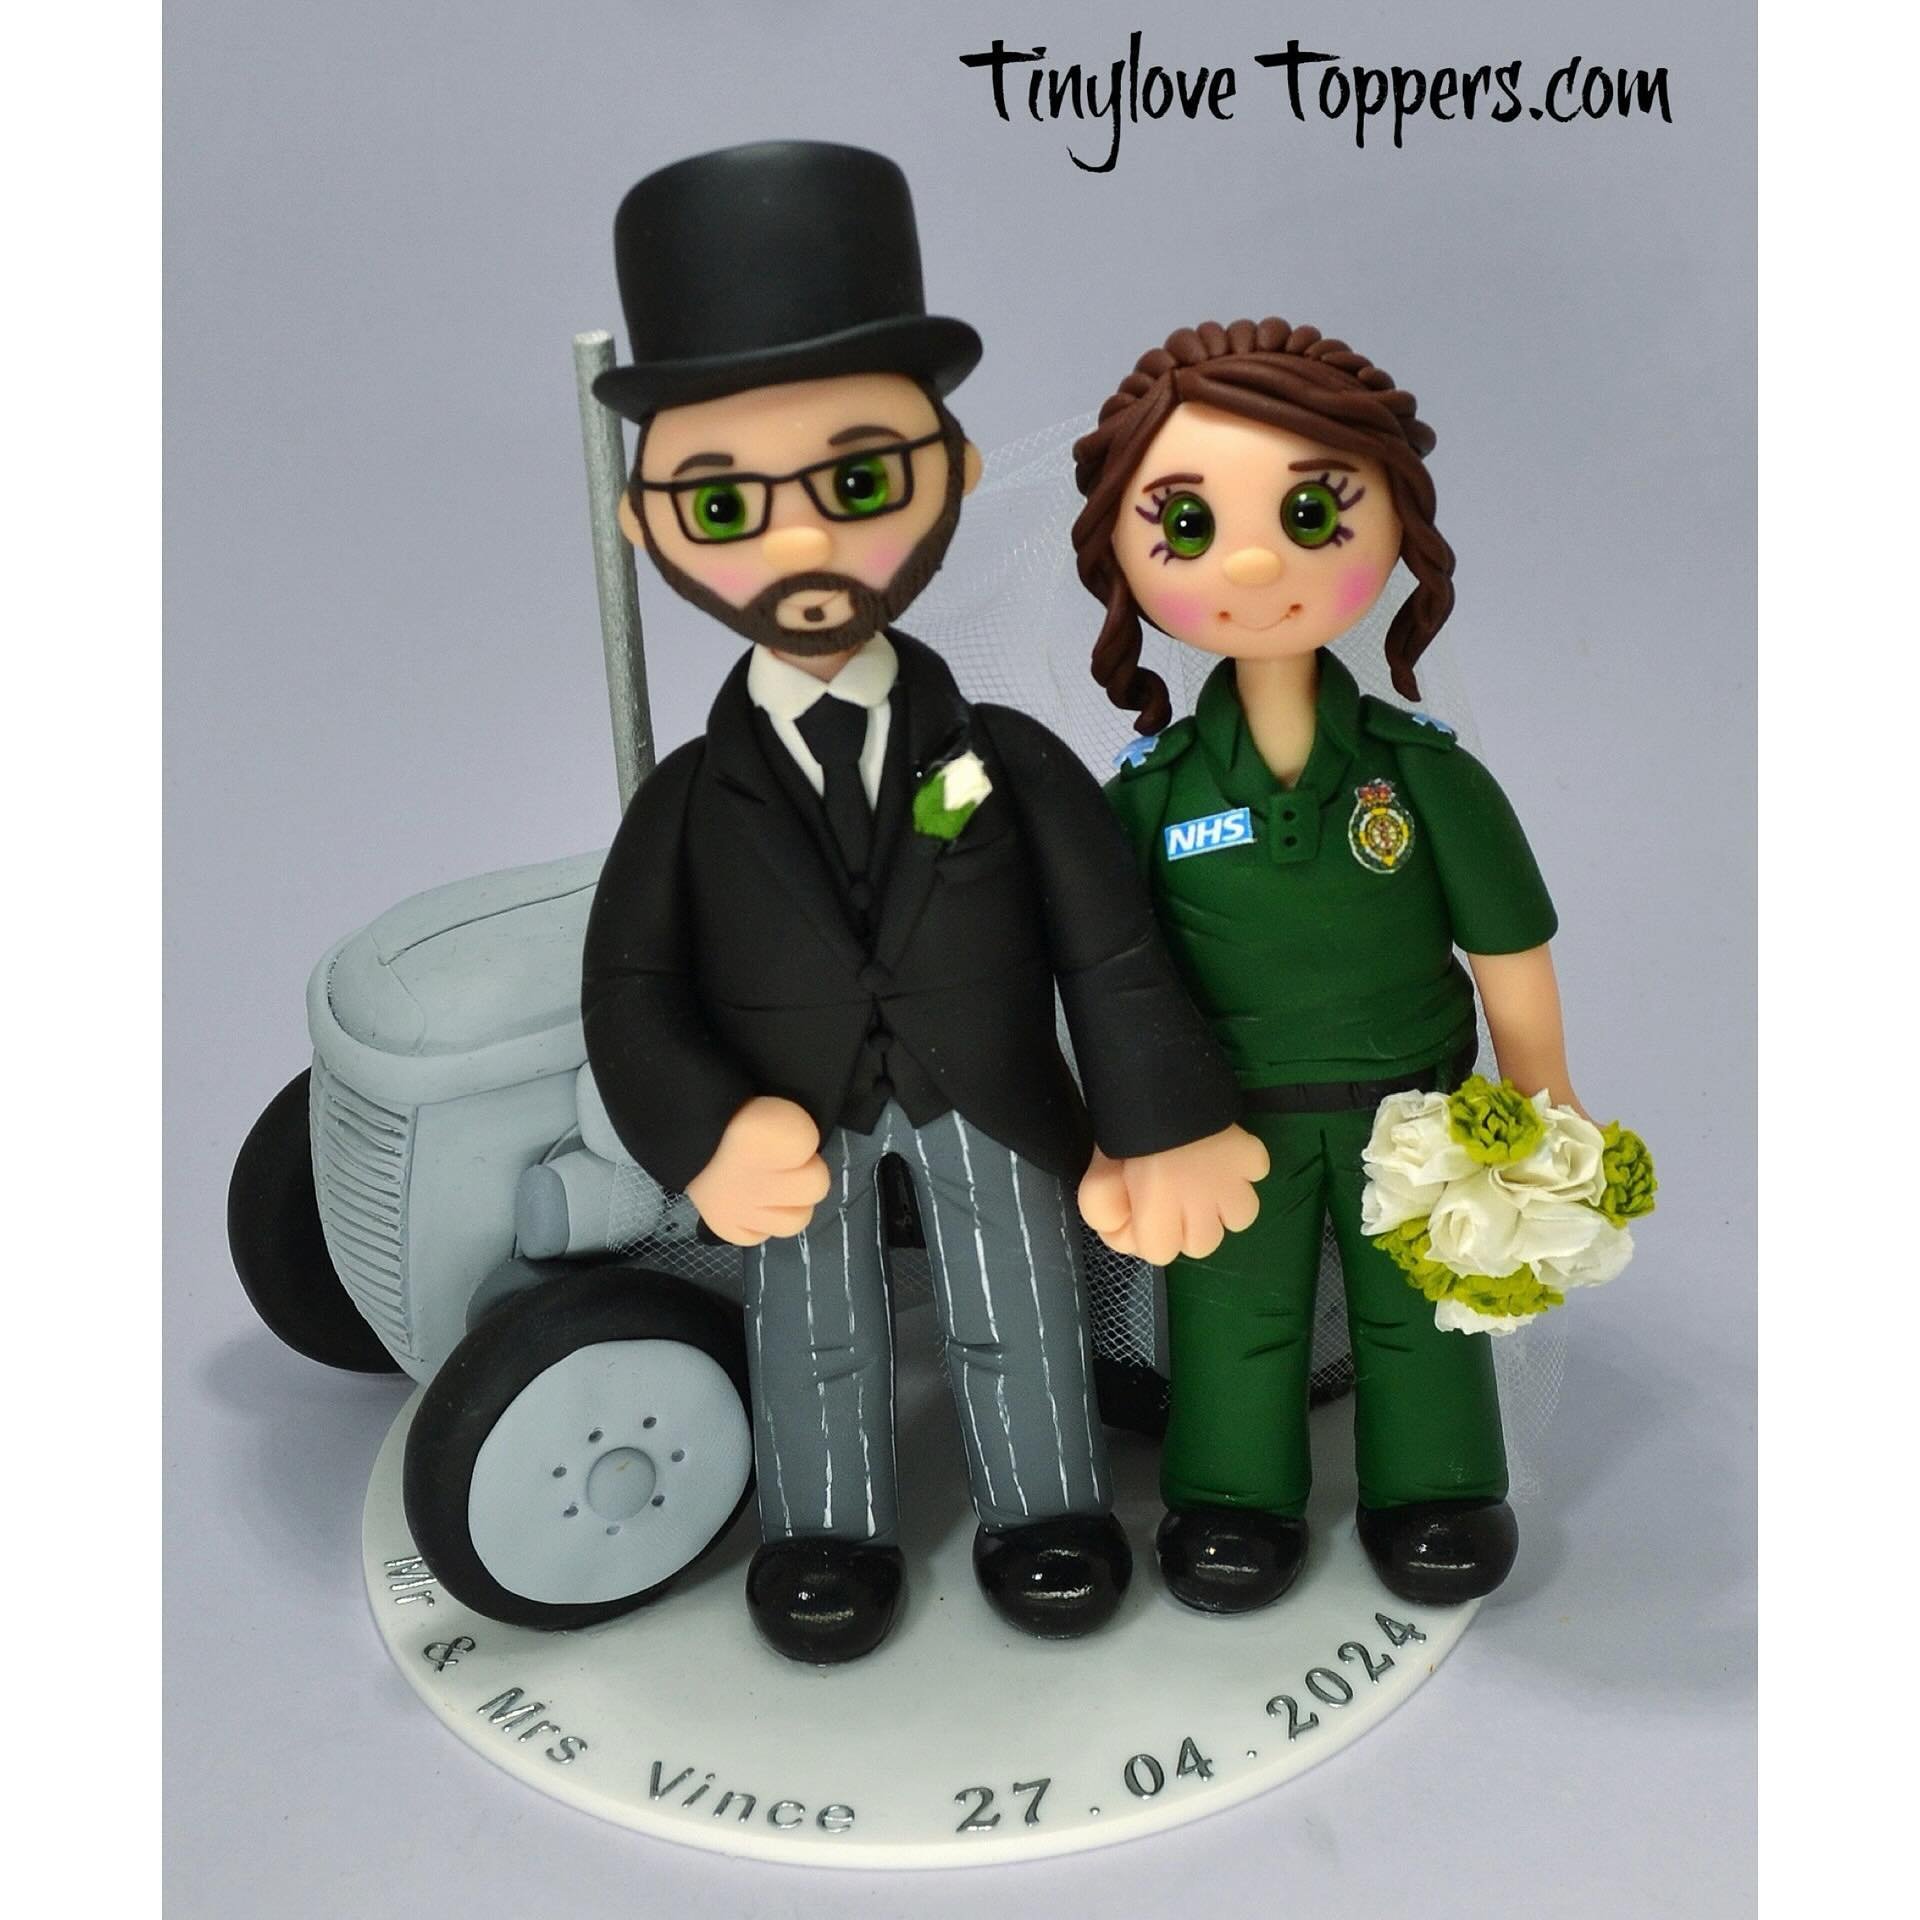 Personalised non edible wedding cake toppers.
made to look like you, lifelong keepsakes.
Message me if you would like a quote for yours. 🙂

#weddingcaketoppers #brideandgroom #bridetobe2024 #bridetobe2025 #engaged #gettingmarriedin2024 #weddingcake